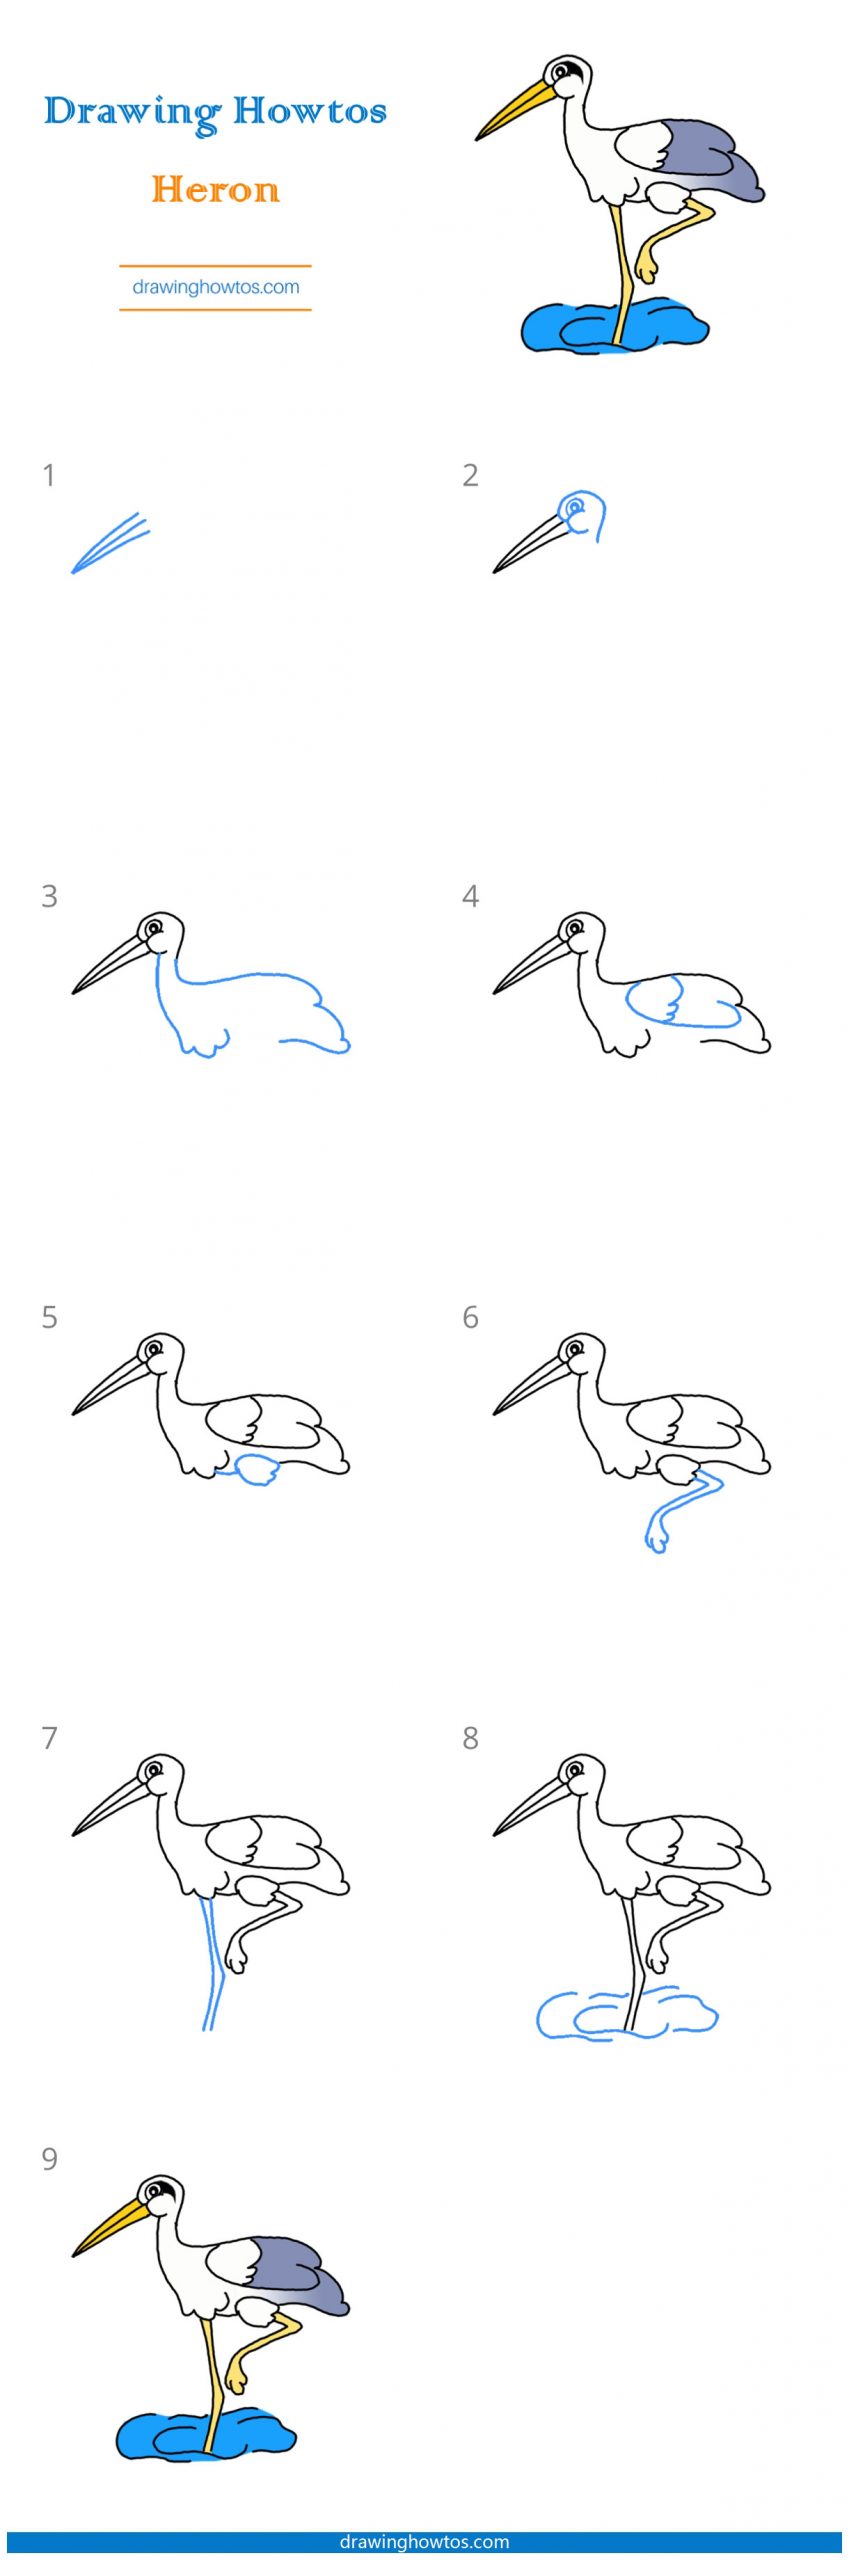 How to Draw a Heron Step by Step